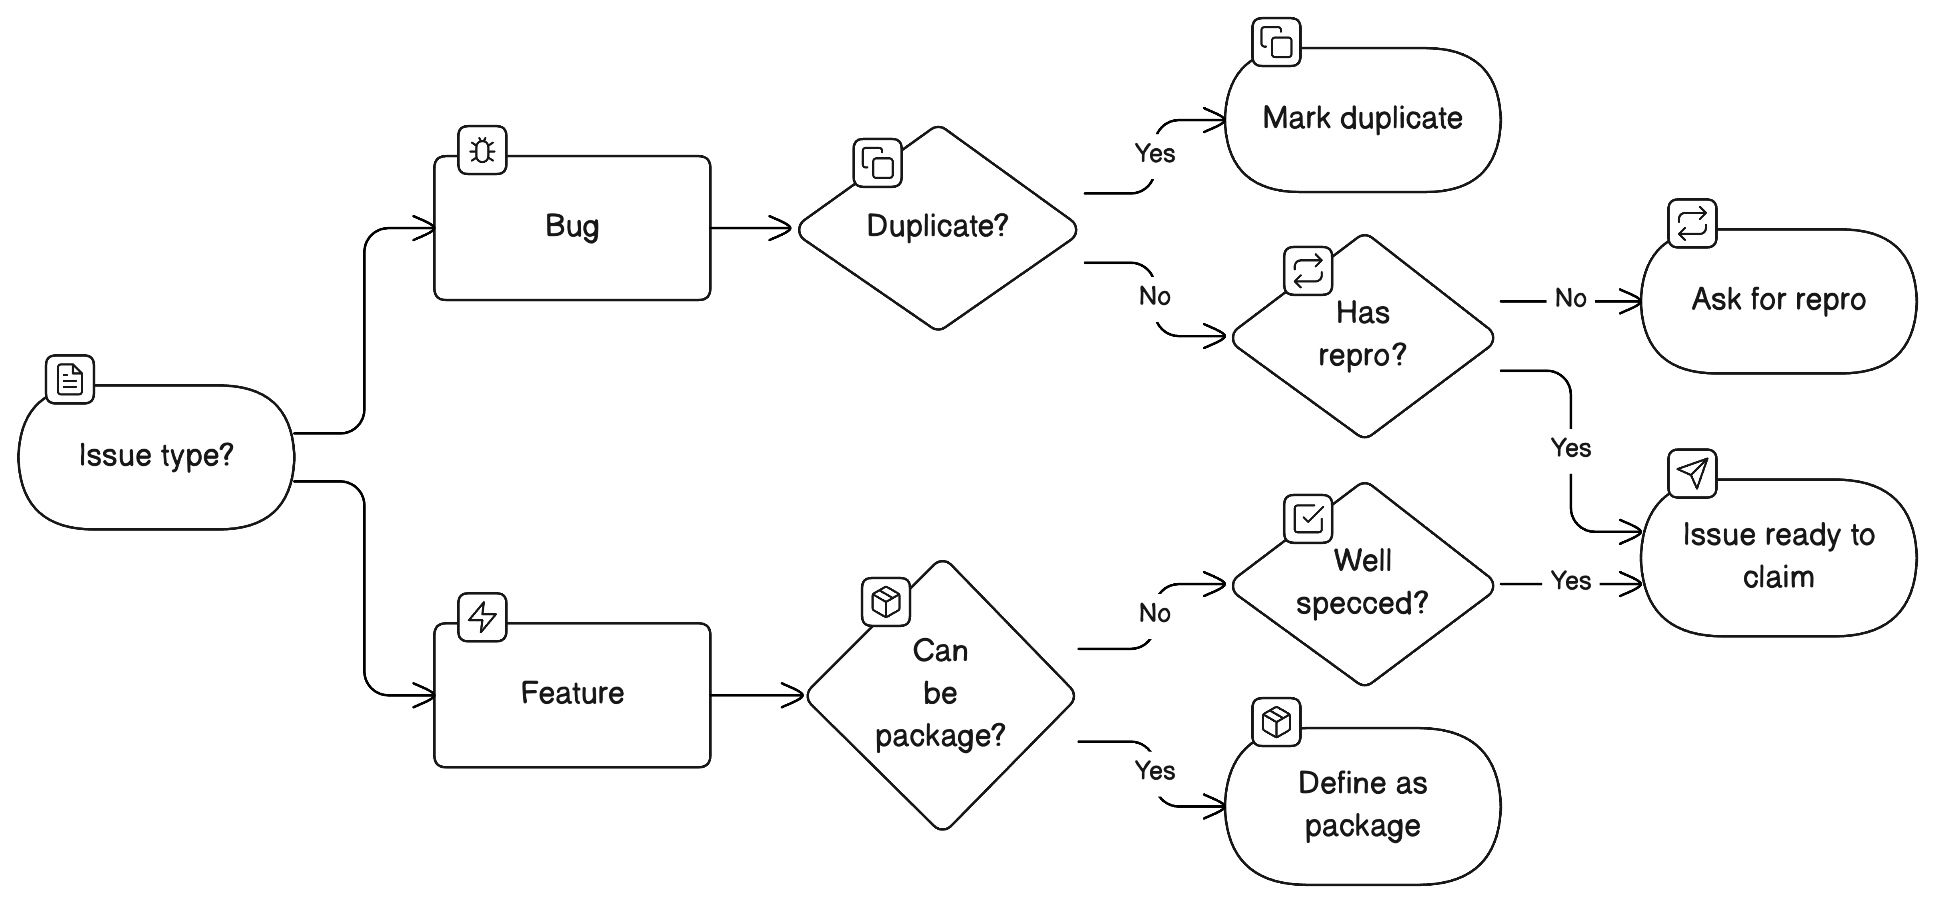 `direction right` has been applied to the flow chart